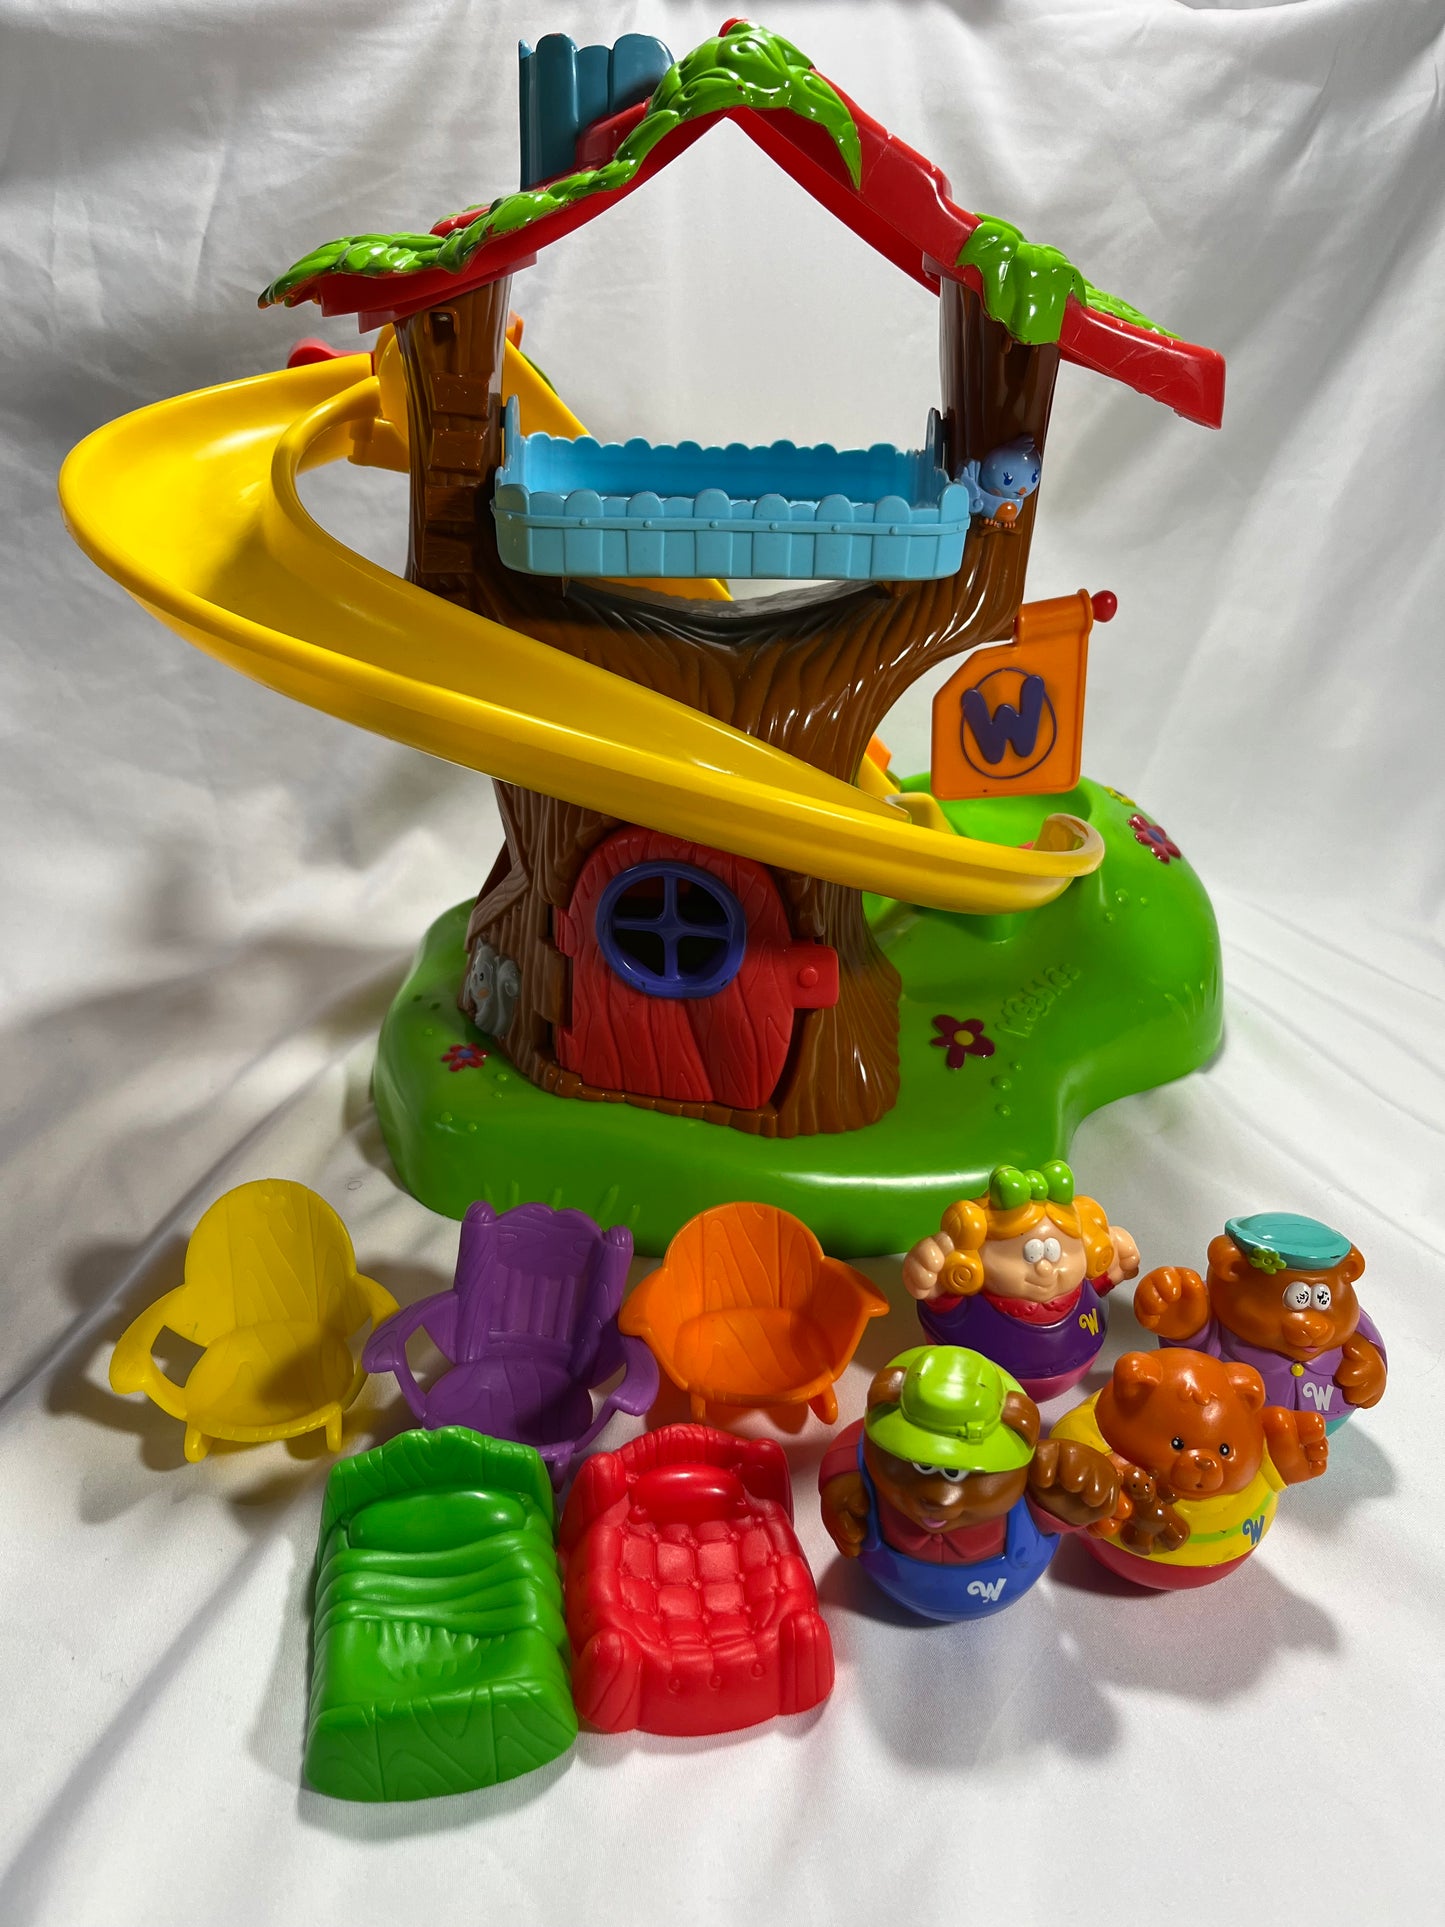 Weeble wobble treehouse playset